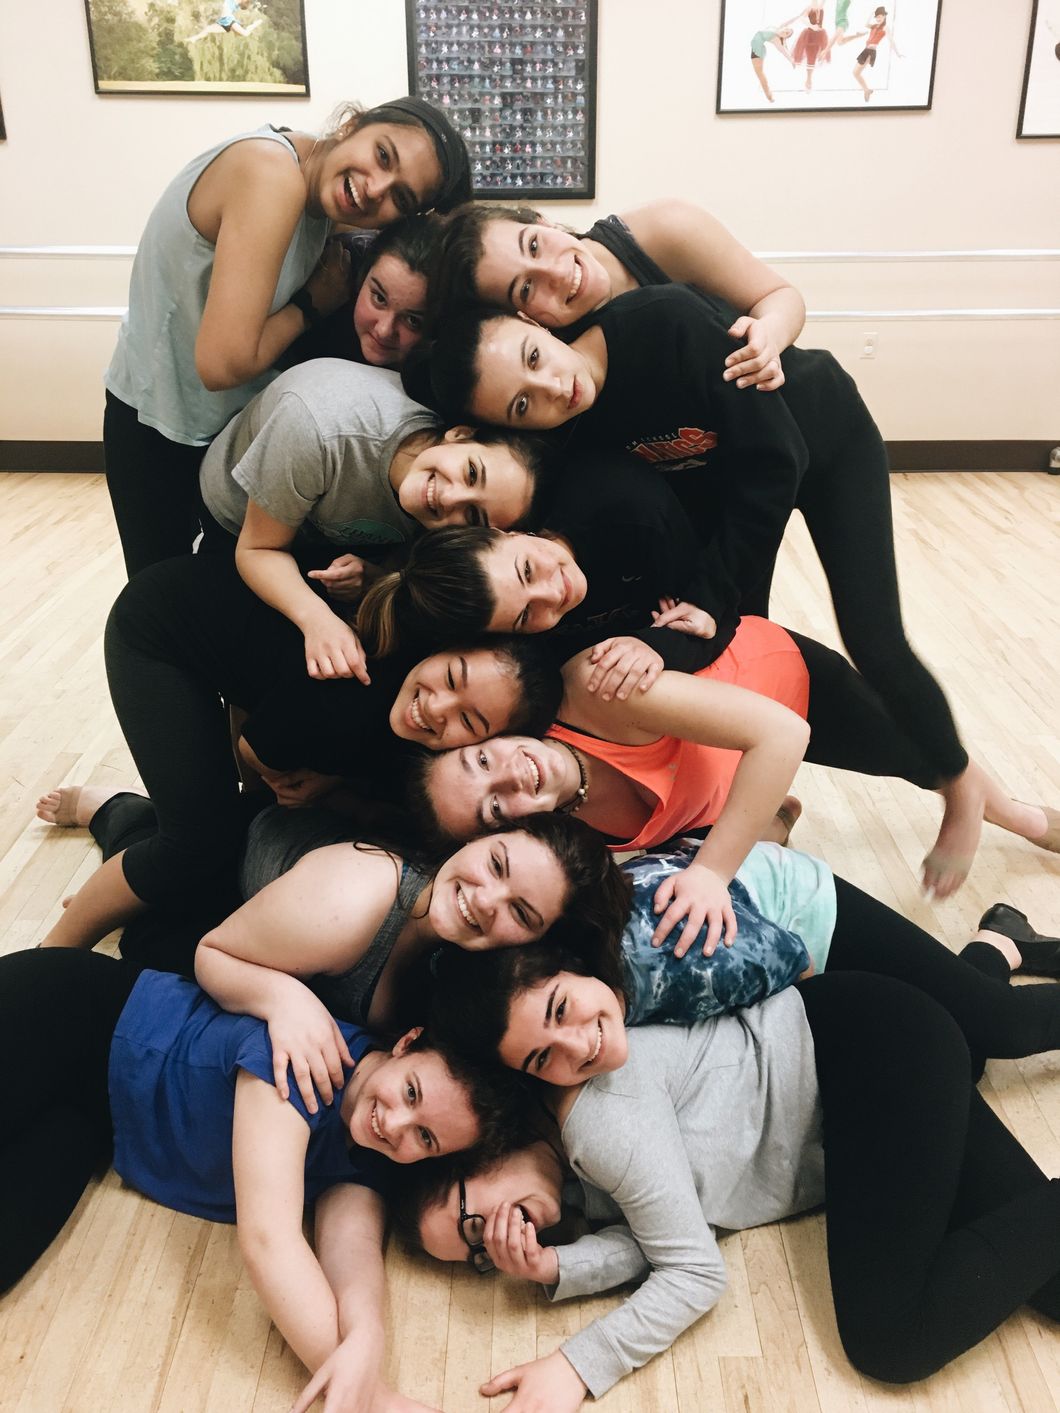 girls in dance class posing for photo together